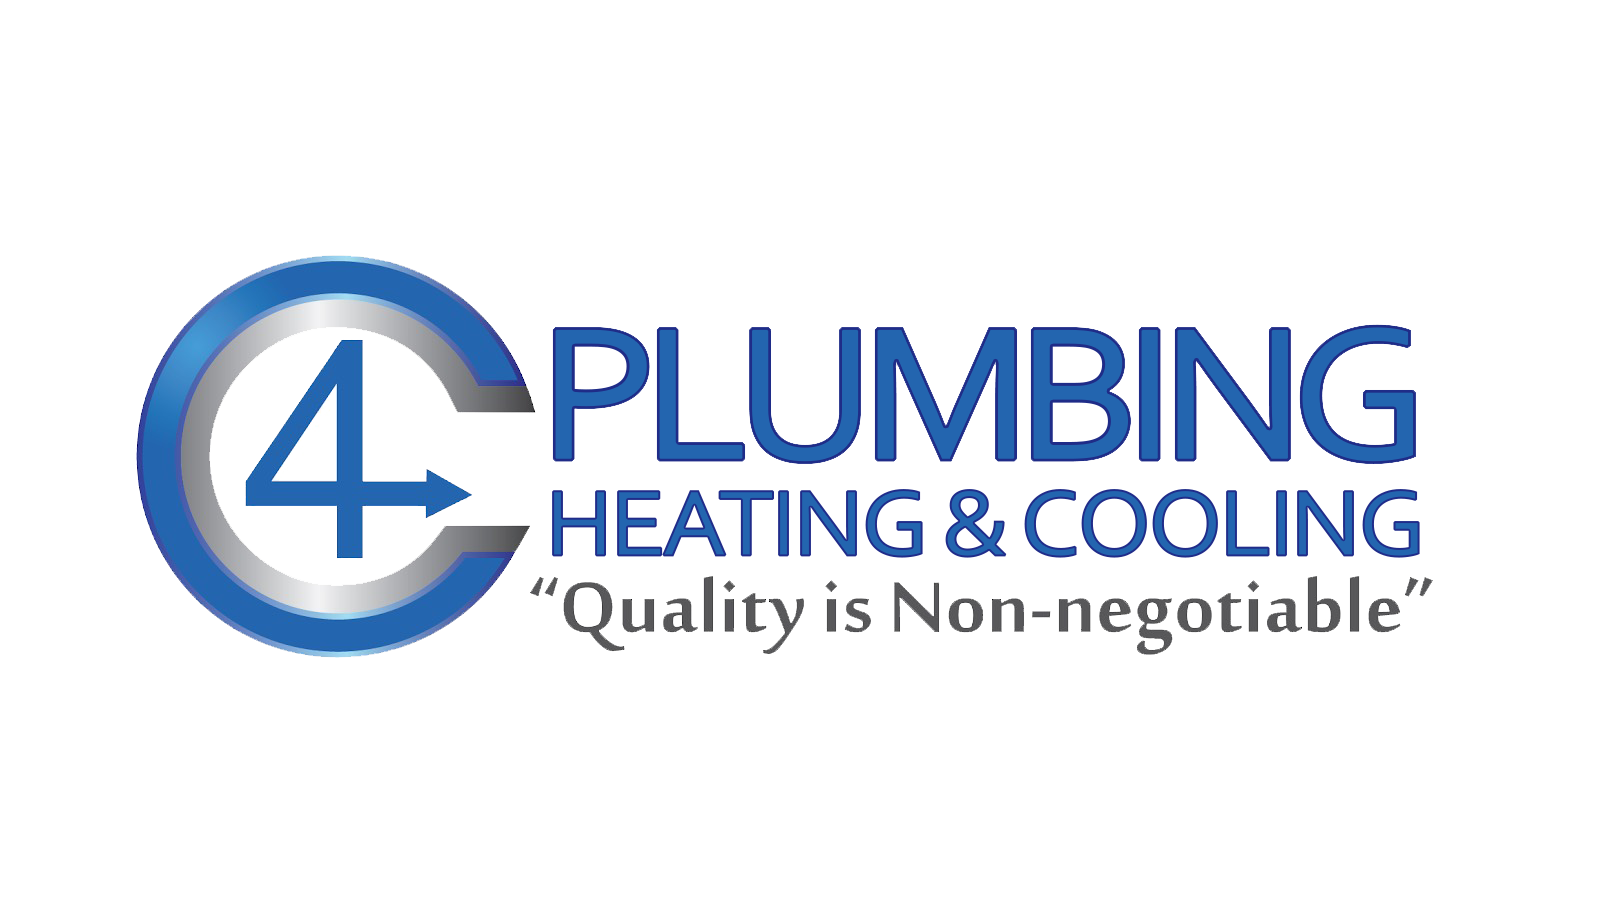 C4 Plumbing, Heating & Cooling reviews | 3033 S. Andes St. - Aurora CO